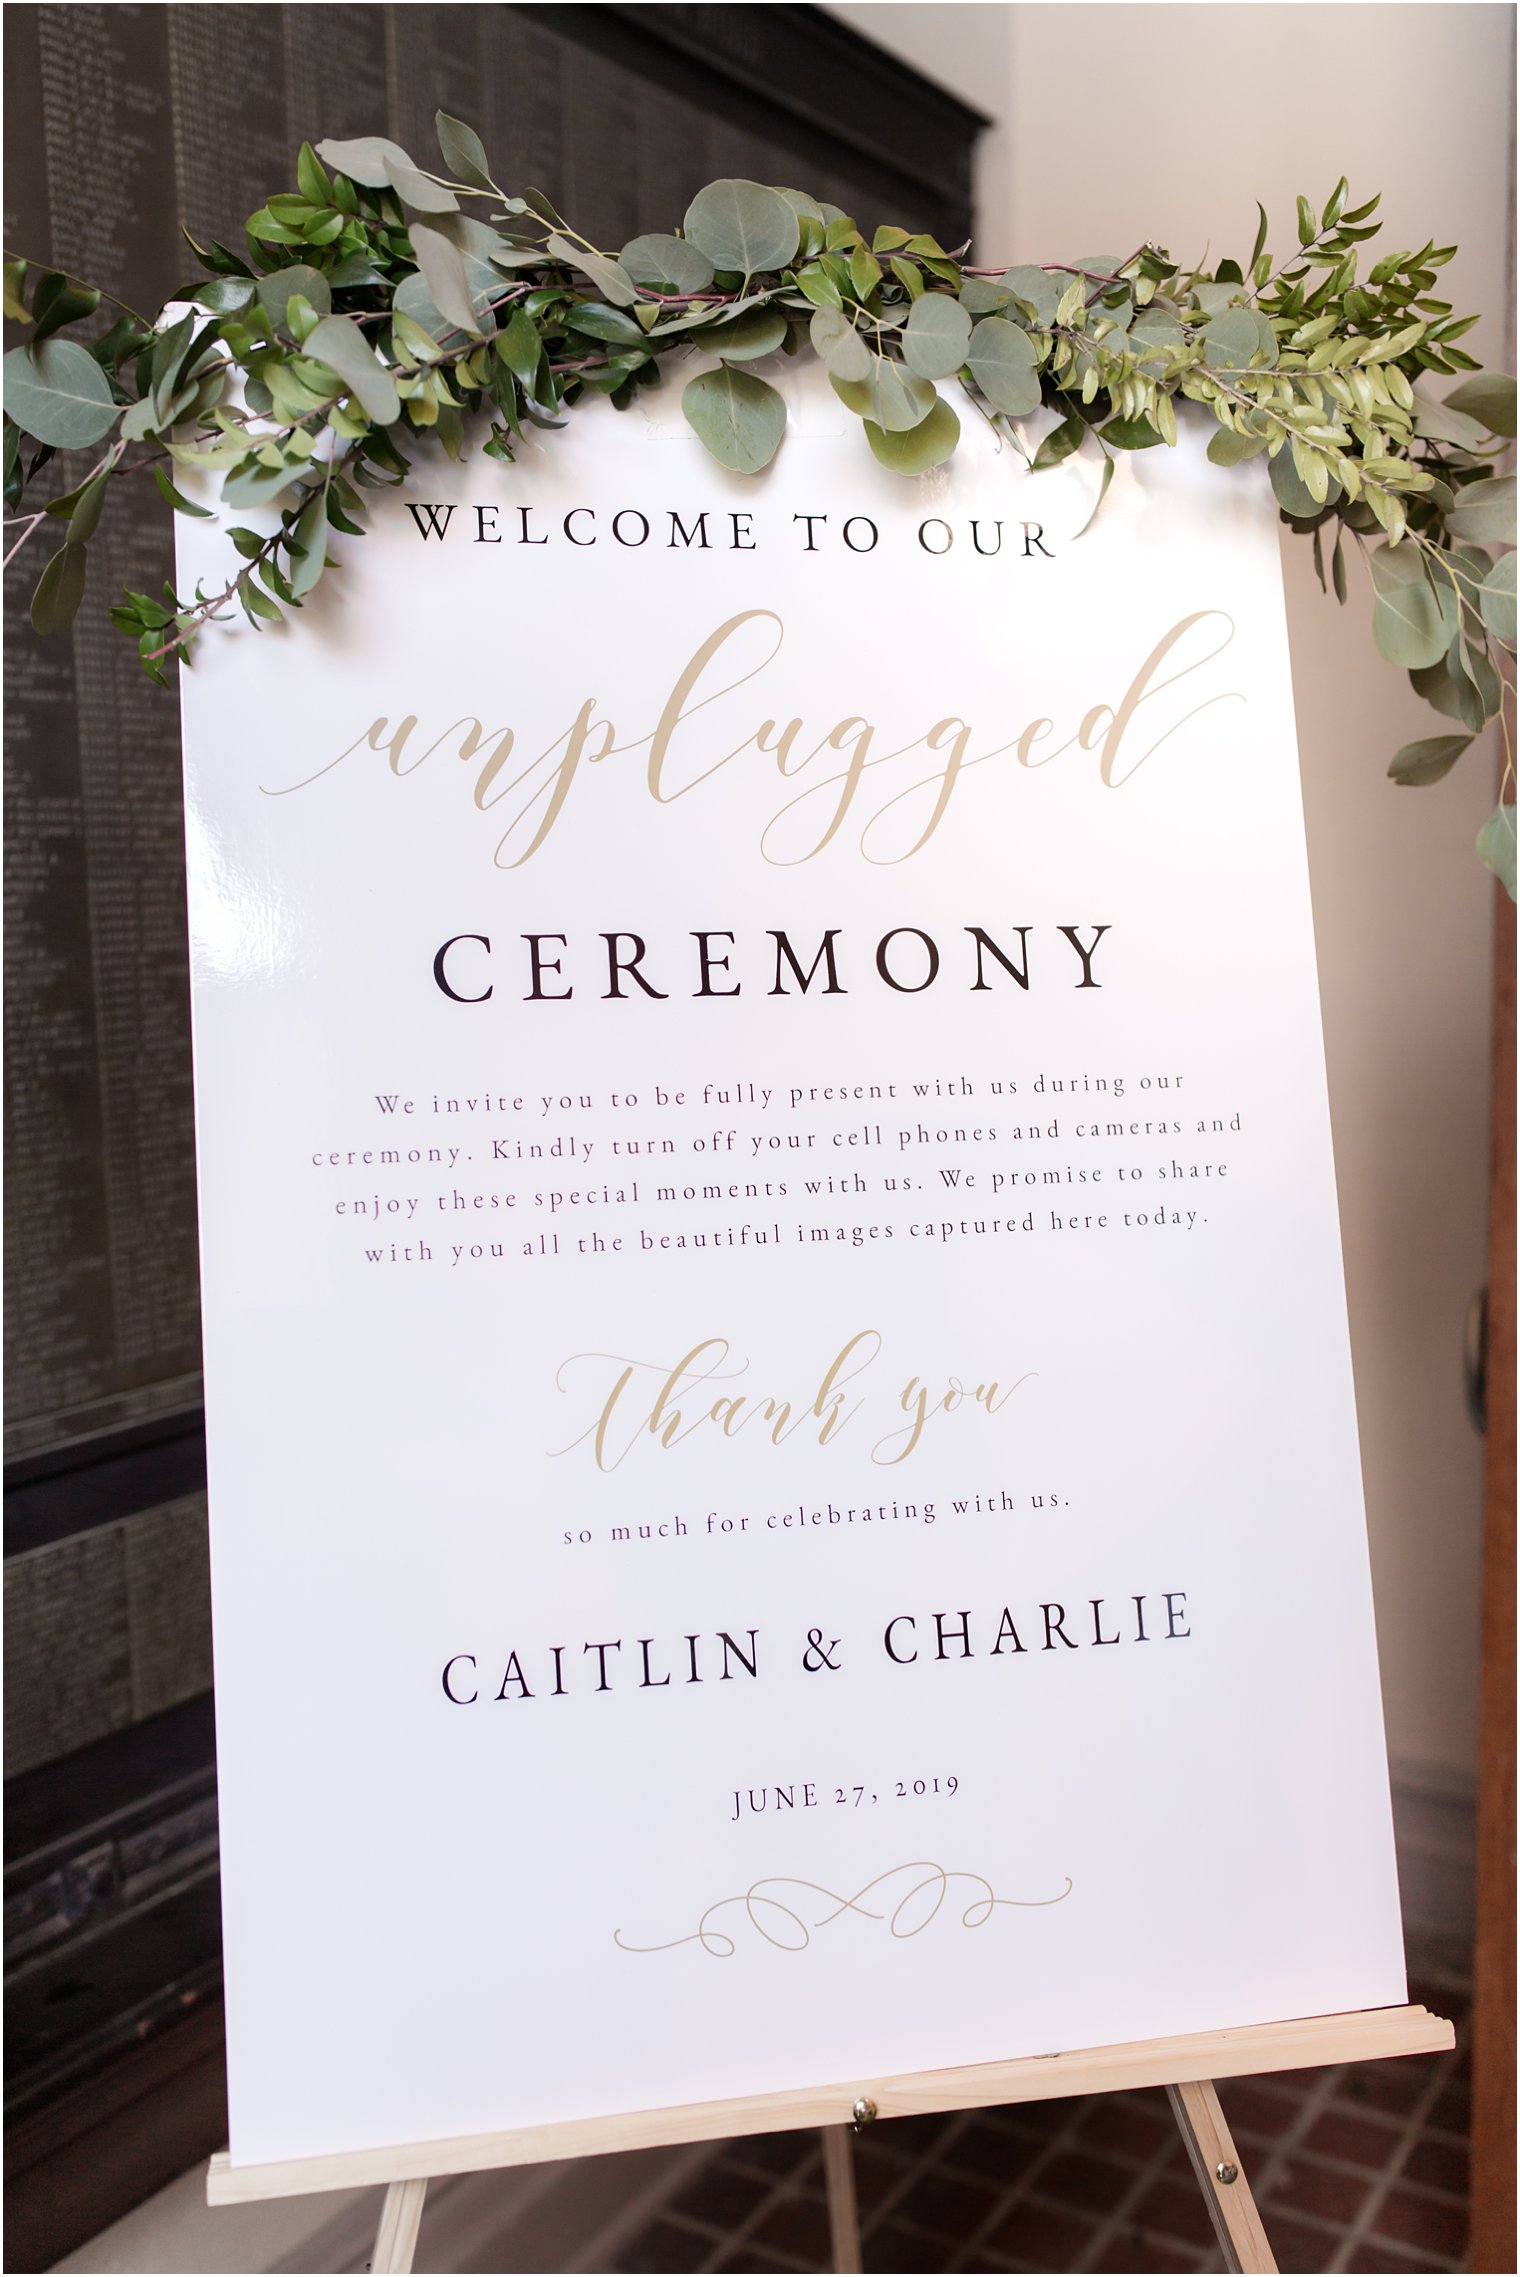 Welcome sign for unplugged ceremony at Park Chateau Estate